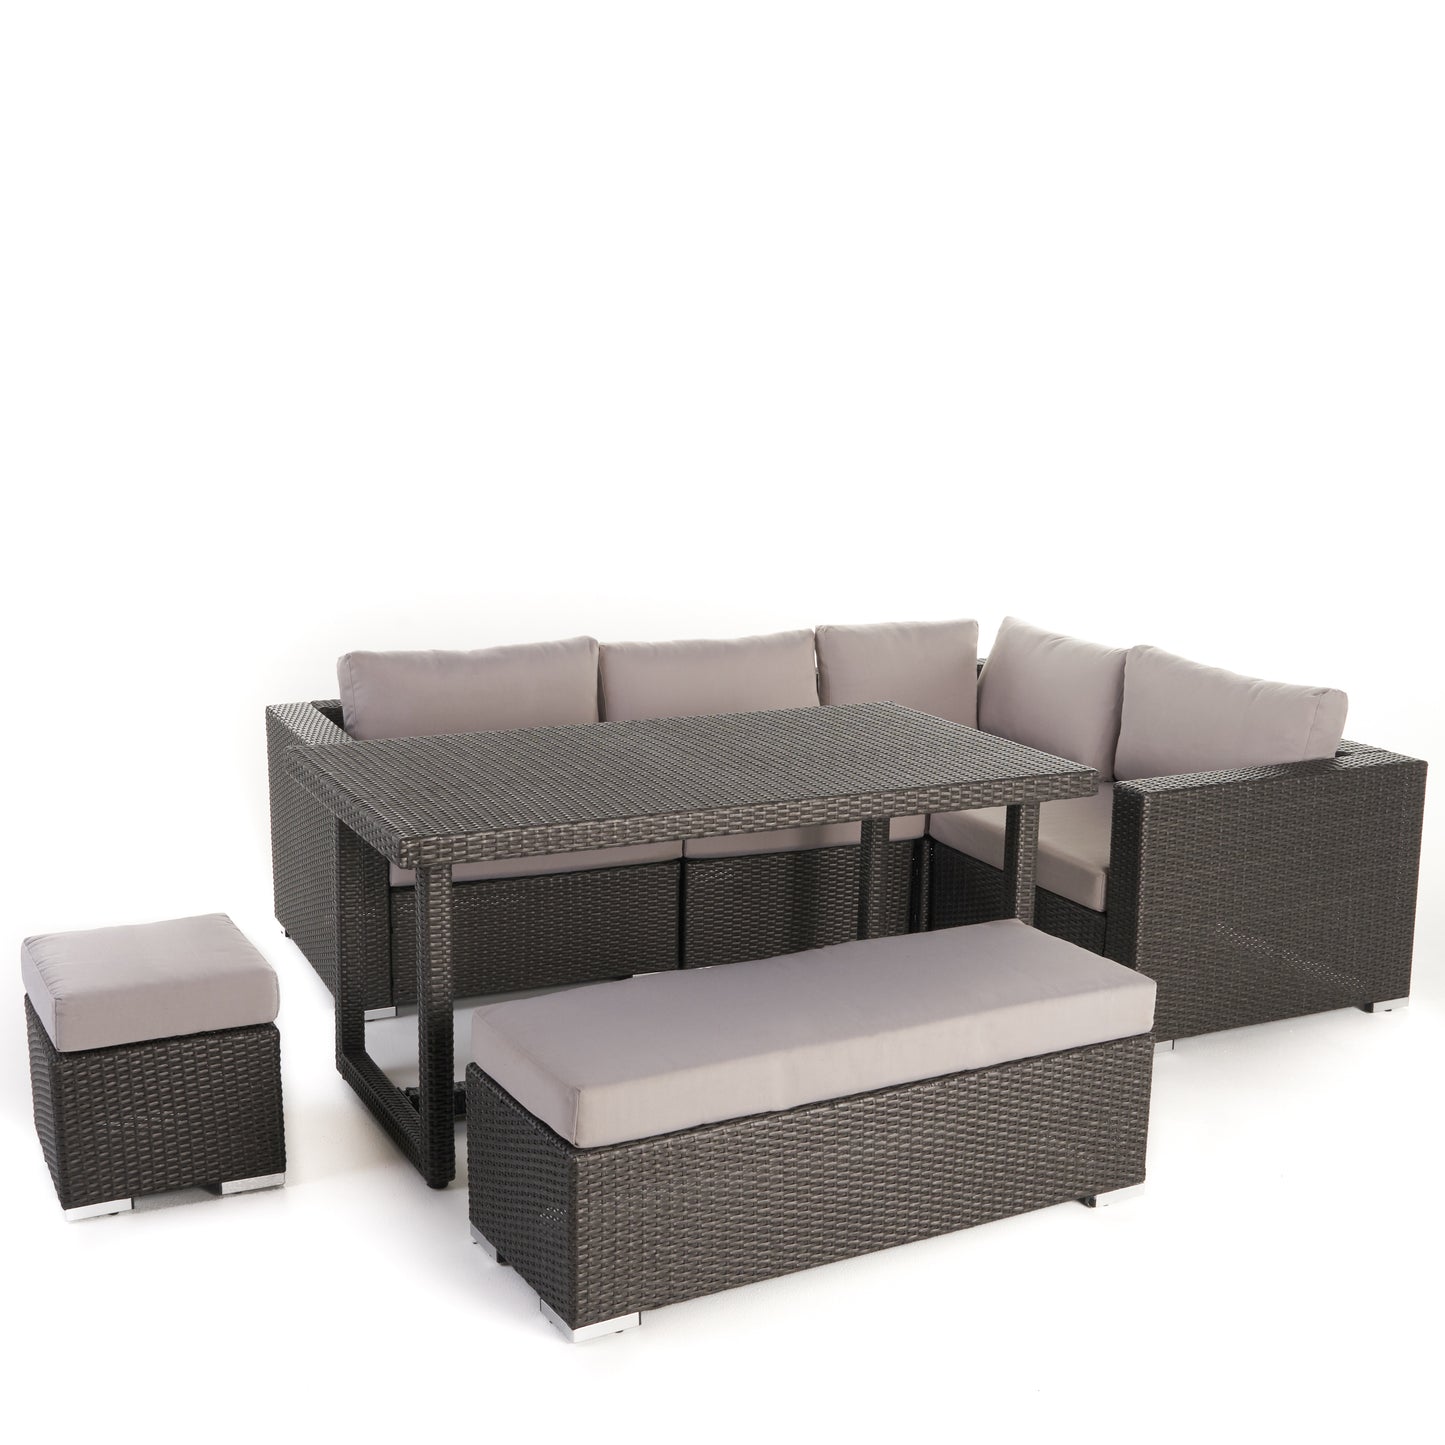 Santa Maria Outdoor 7 Seat Dining Sofa Set with Aluminum Frame and Water Resistant Cushions